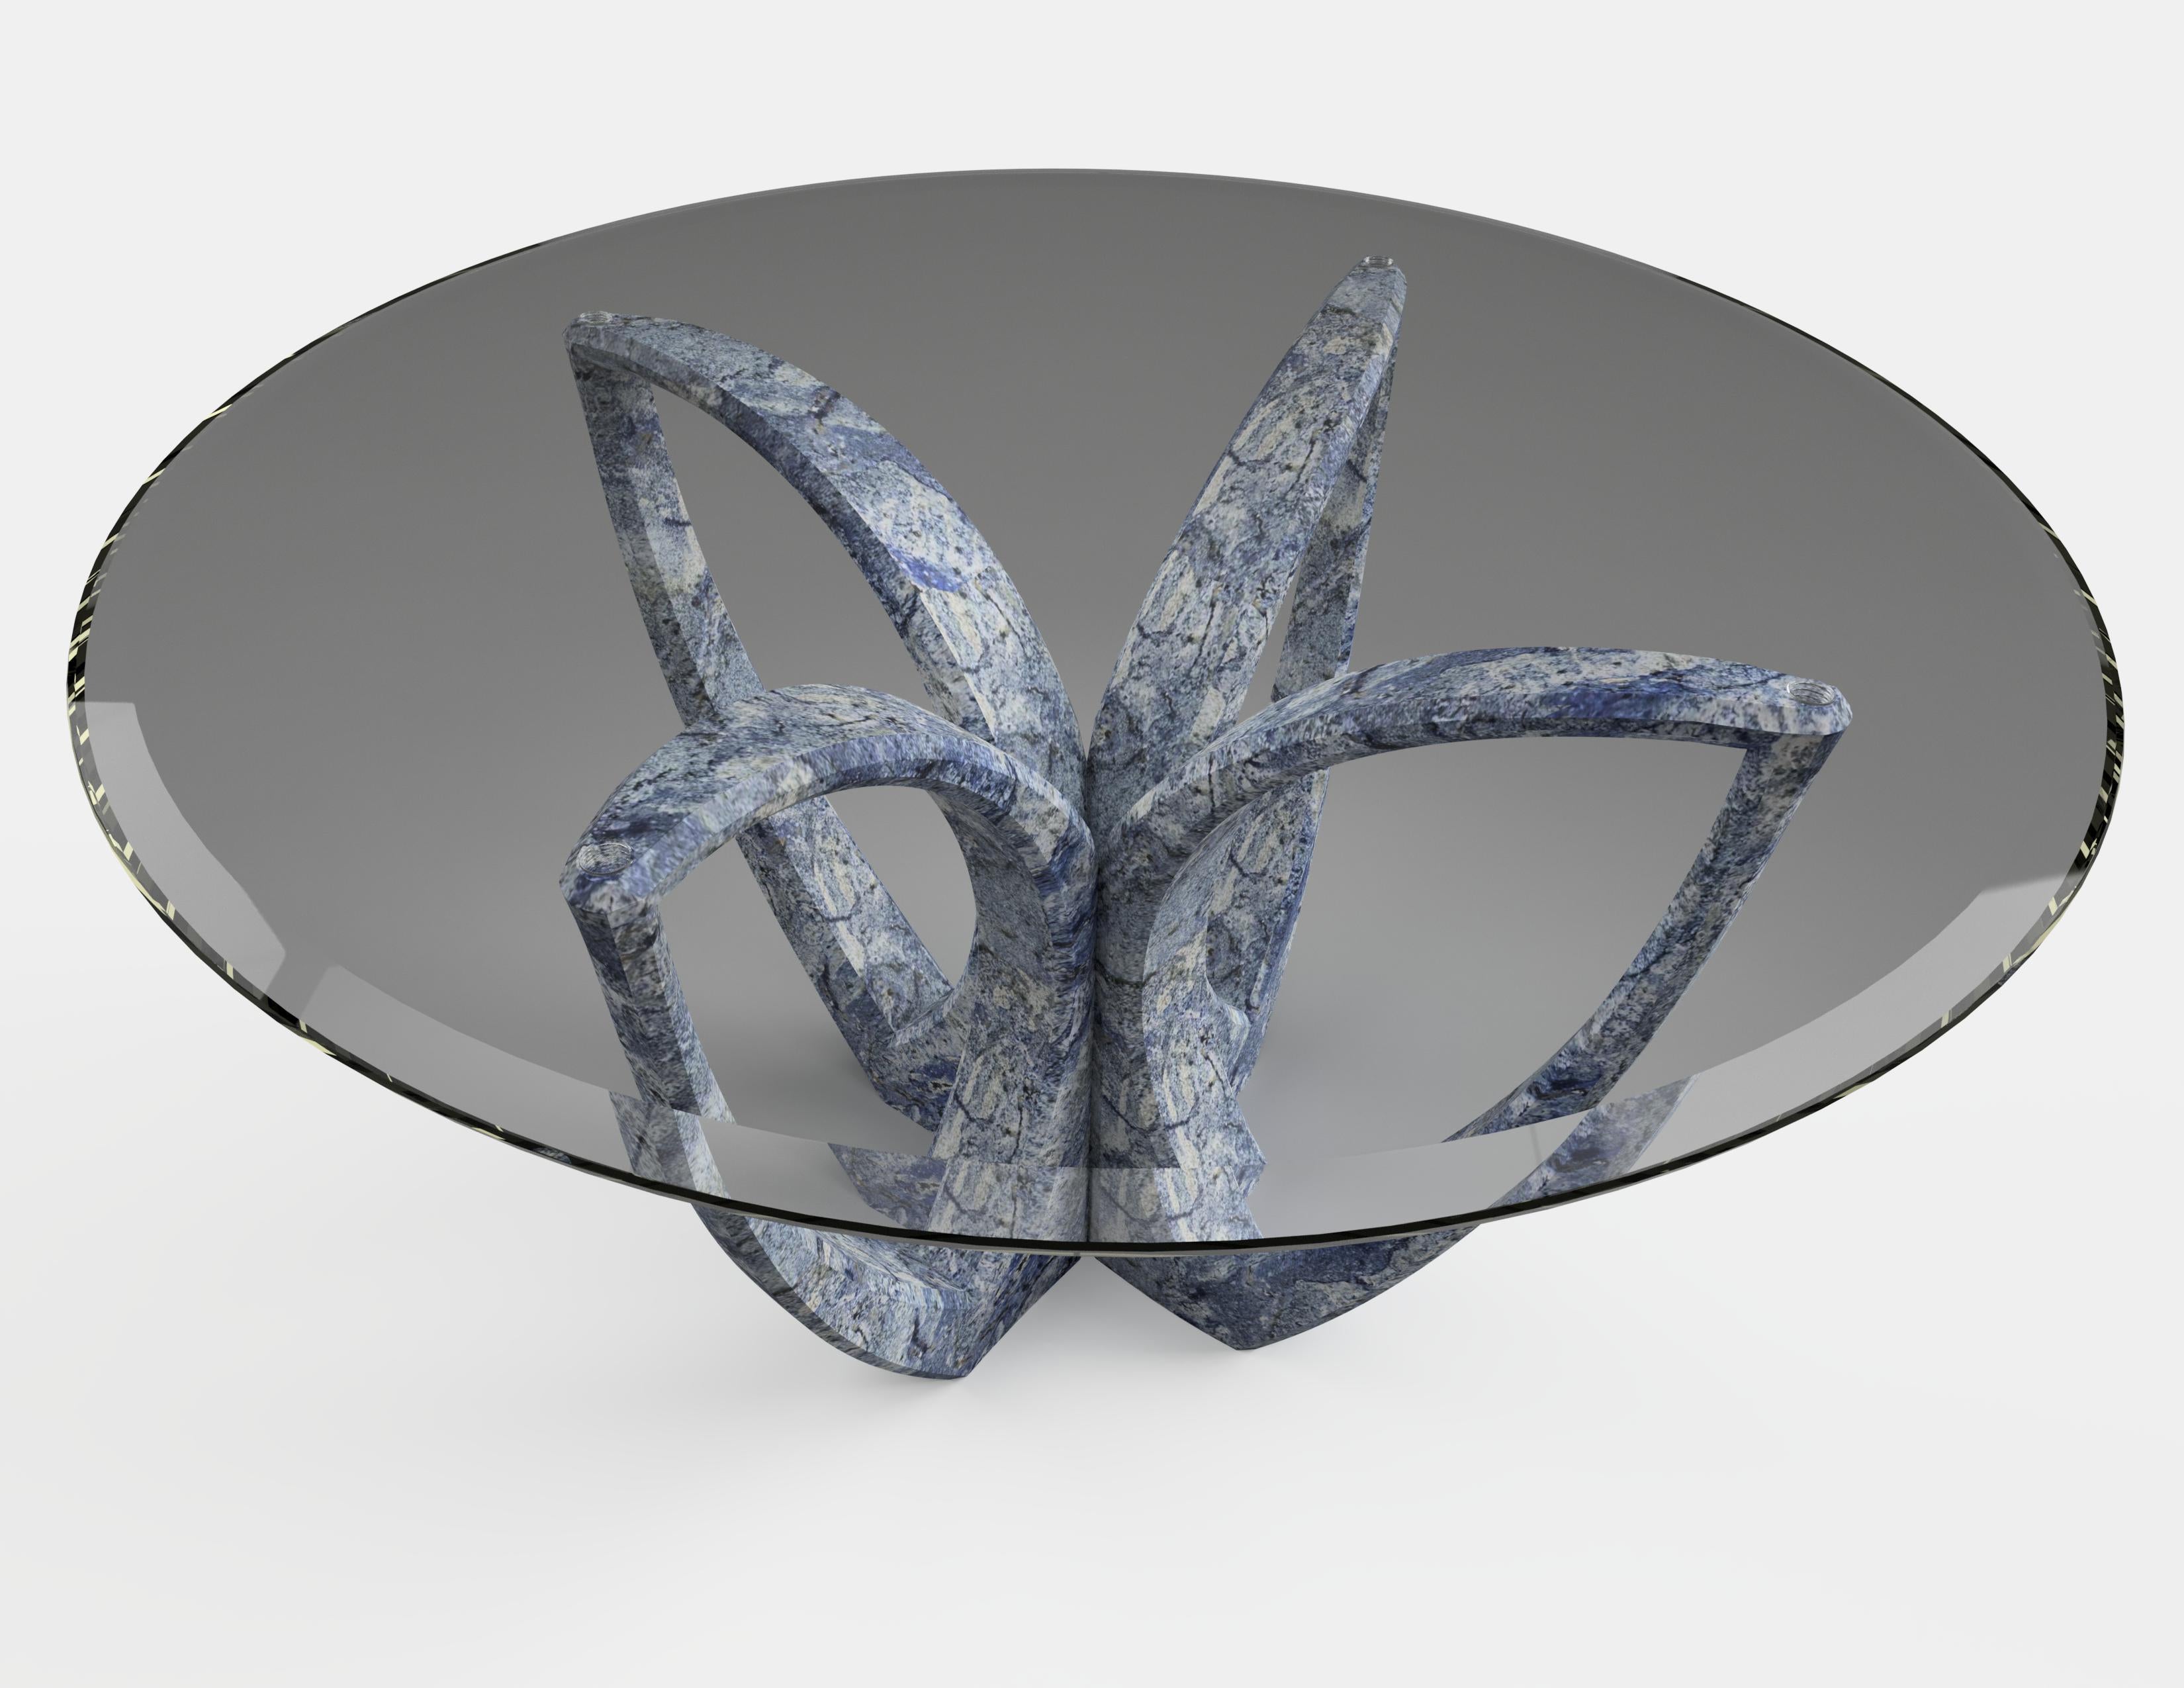 Hand-Crafted Diamond Lotus Coffee Table, 1 of 1 by Grzegorz Majka For Sale